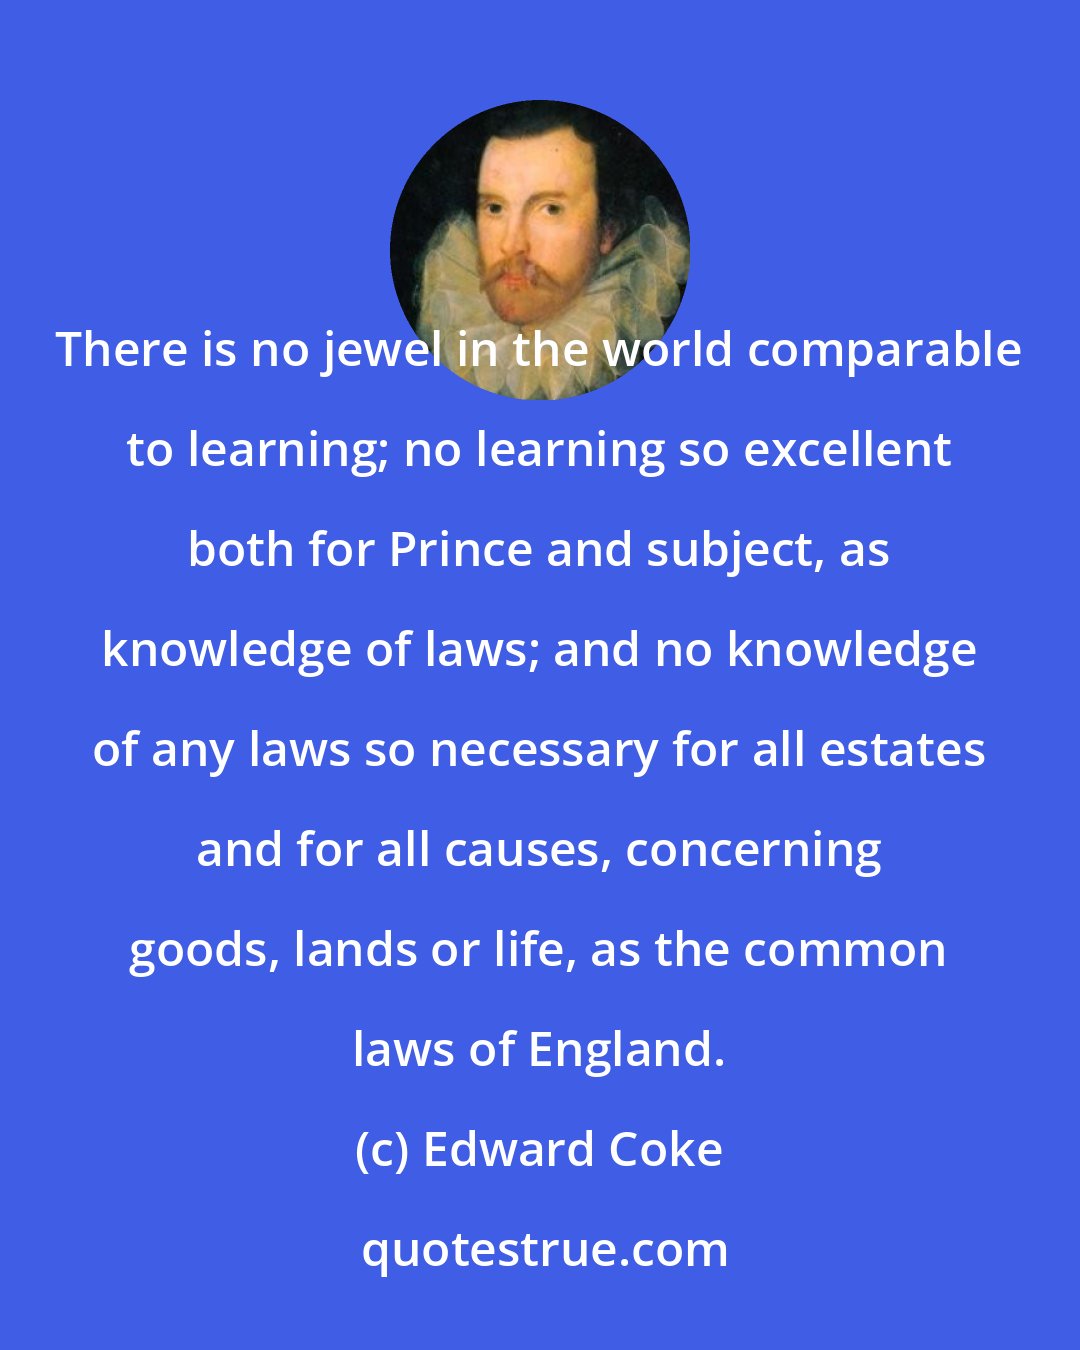 Edward Coke: There is no jewel in the world comparable to learning; no learning so excellent both for Prince and subject, as knowledge of laws; and no knowledge of any laws so necessary for all estates and for all causes, concerning goods, lands or life, as the common laws of England.